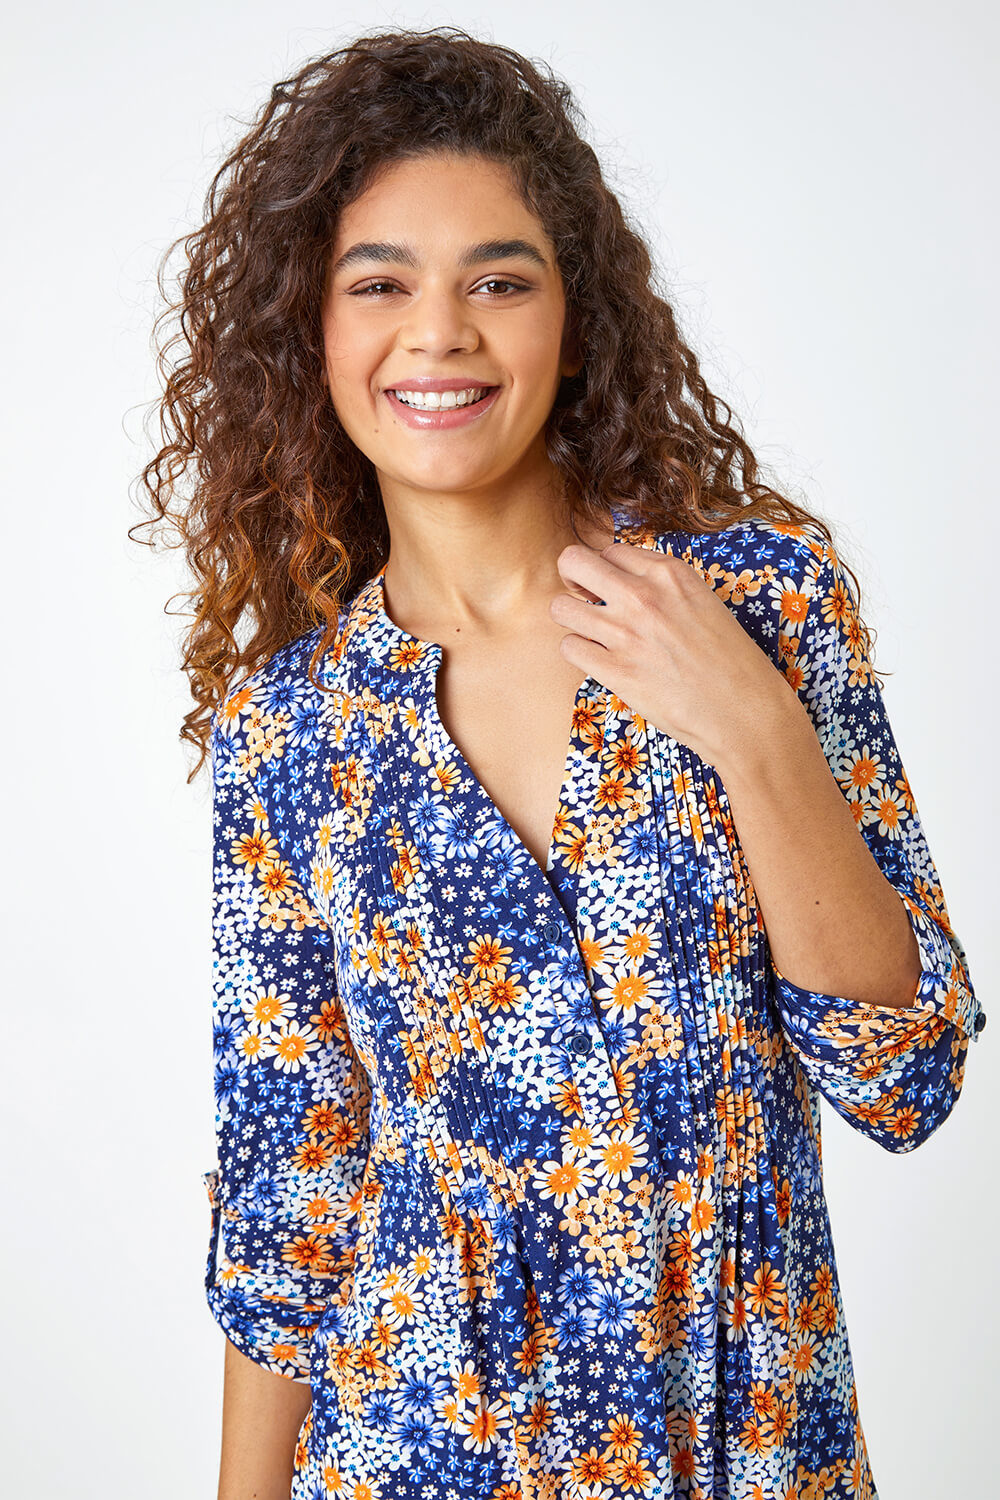 ORANGE Ditsy Floral Pintuck 3/4 Sleeve Jersey Shirt, Image 4 of 5